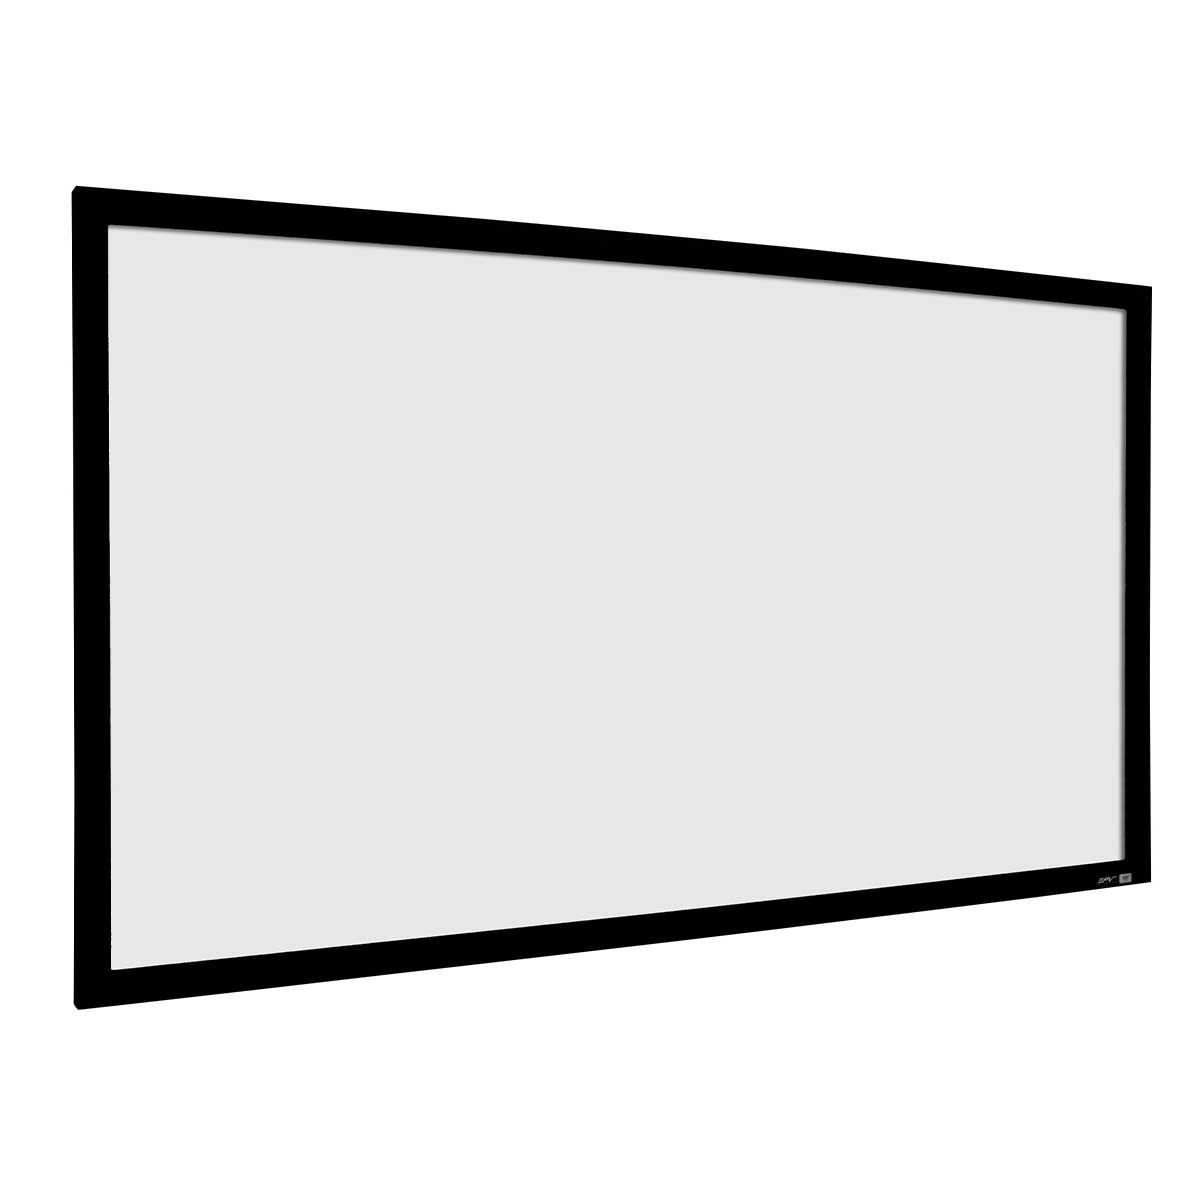 EPV Prime Vision ISF Series, 180 Inch Diagonal 16:9, Fixed Frame, Hand-Wrapped Velvet, ISF-Certified Front Projection Screen, 2.4 Inch Diagonal width frame